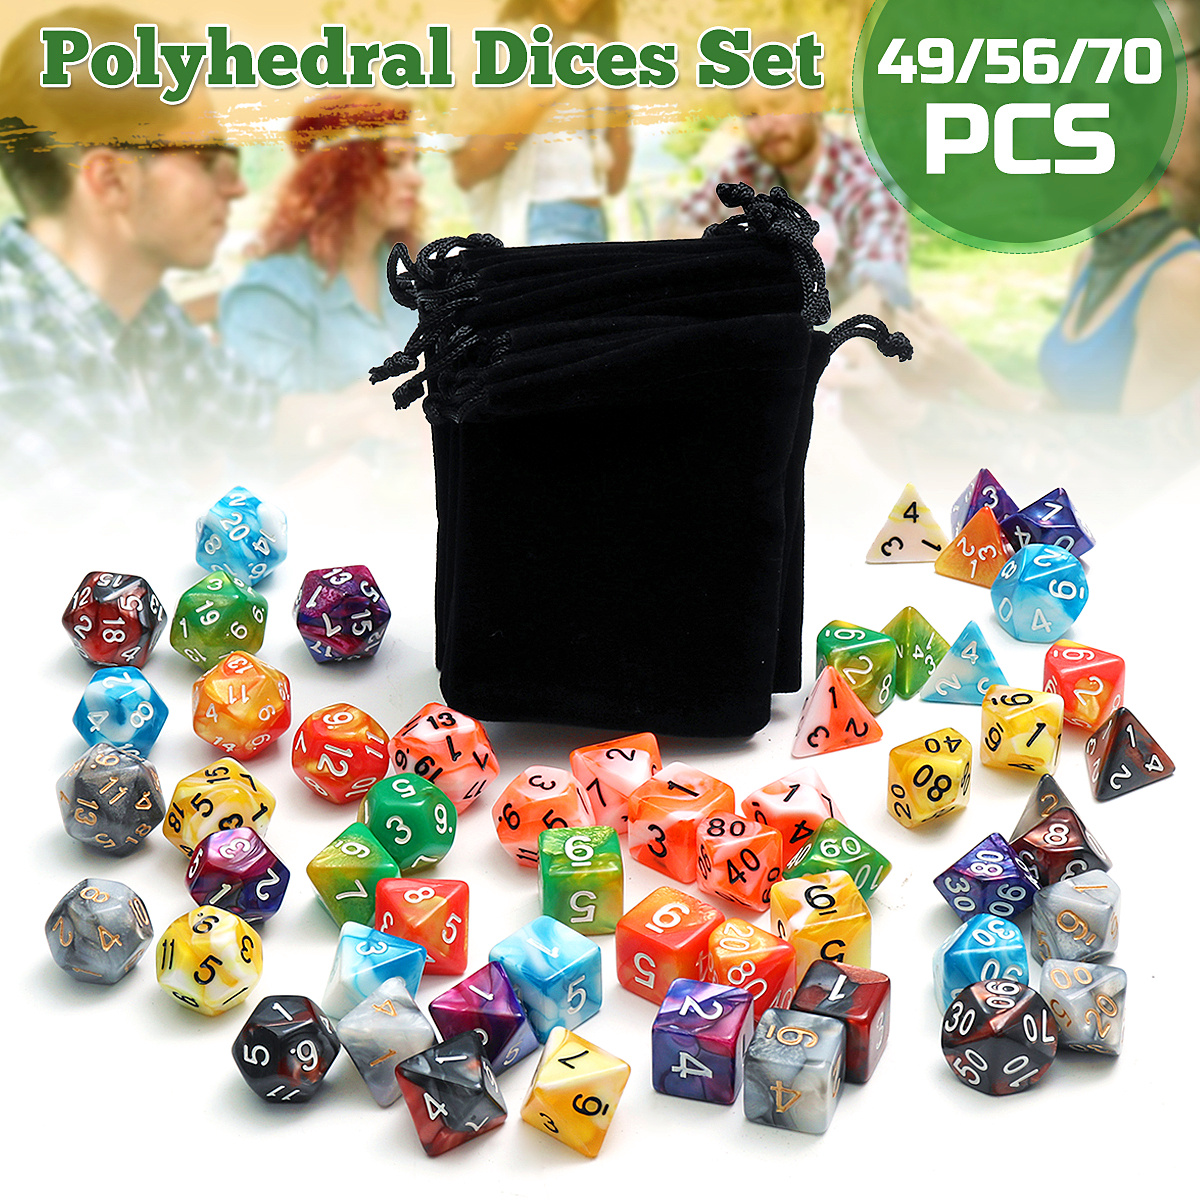 495670Pcs-Polyhedral-Dices-for-Dungeons--Dragons-Desktop-Games-With-Storage-Bags-1646830-1